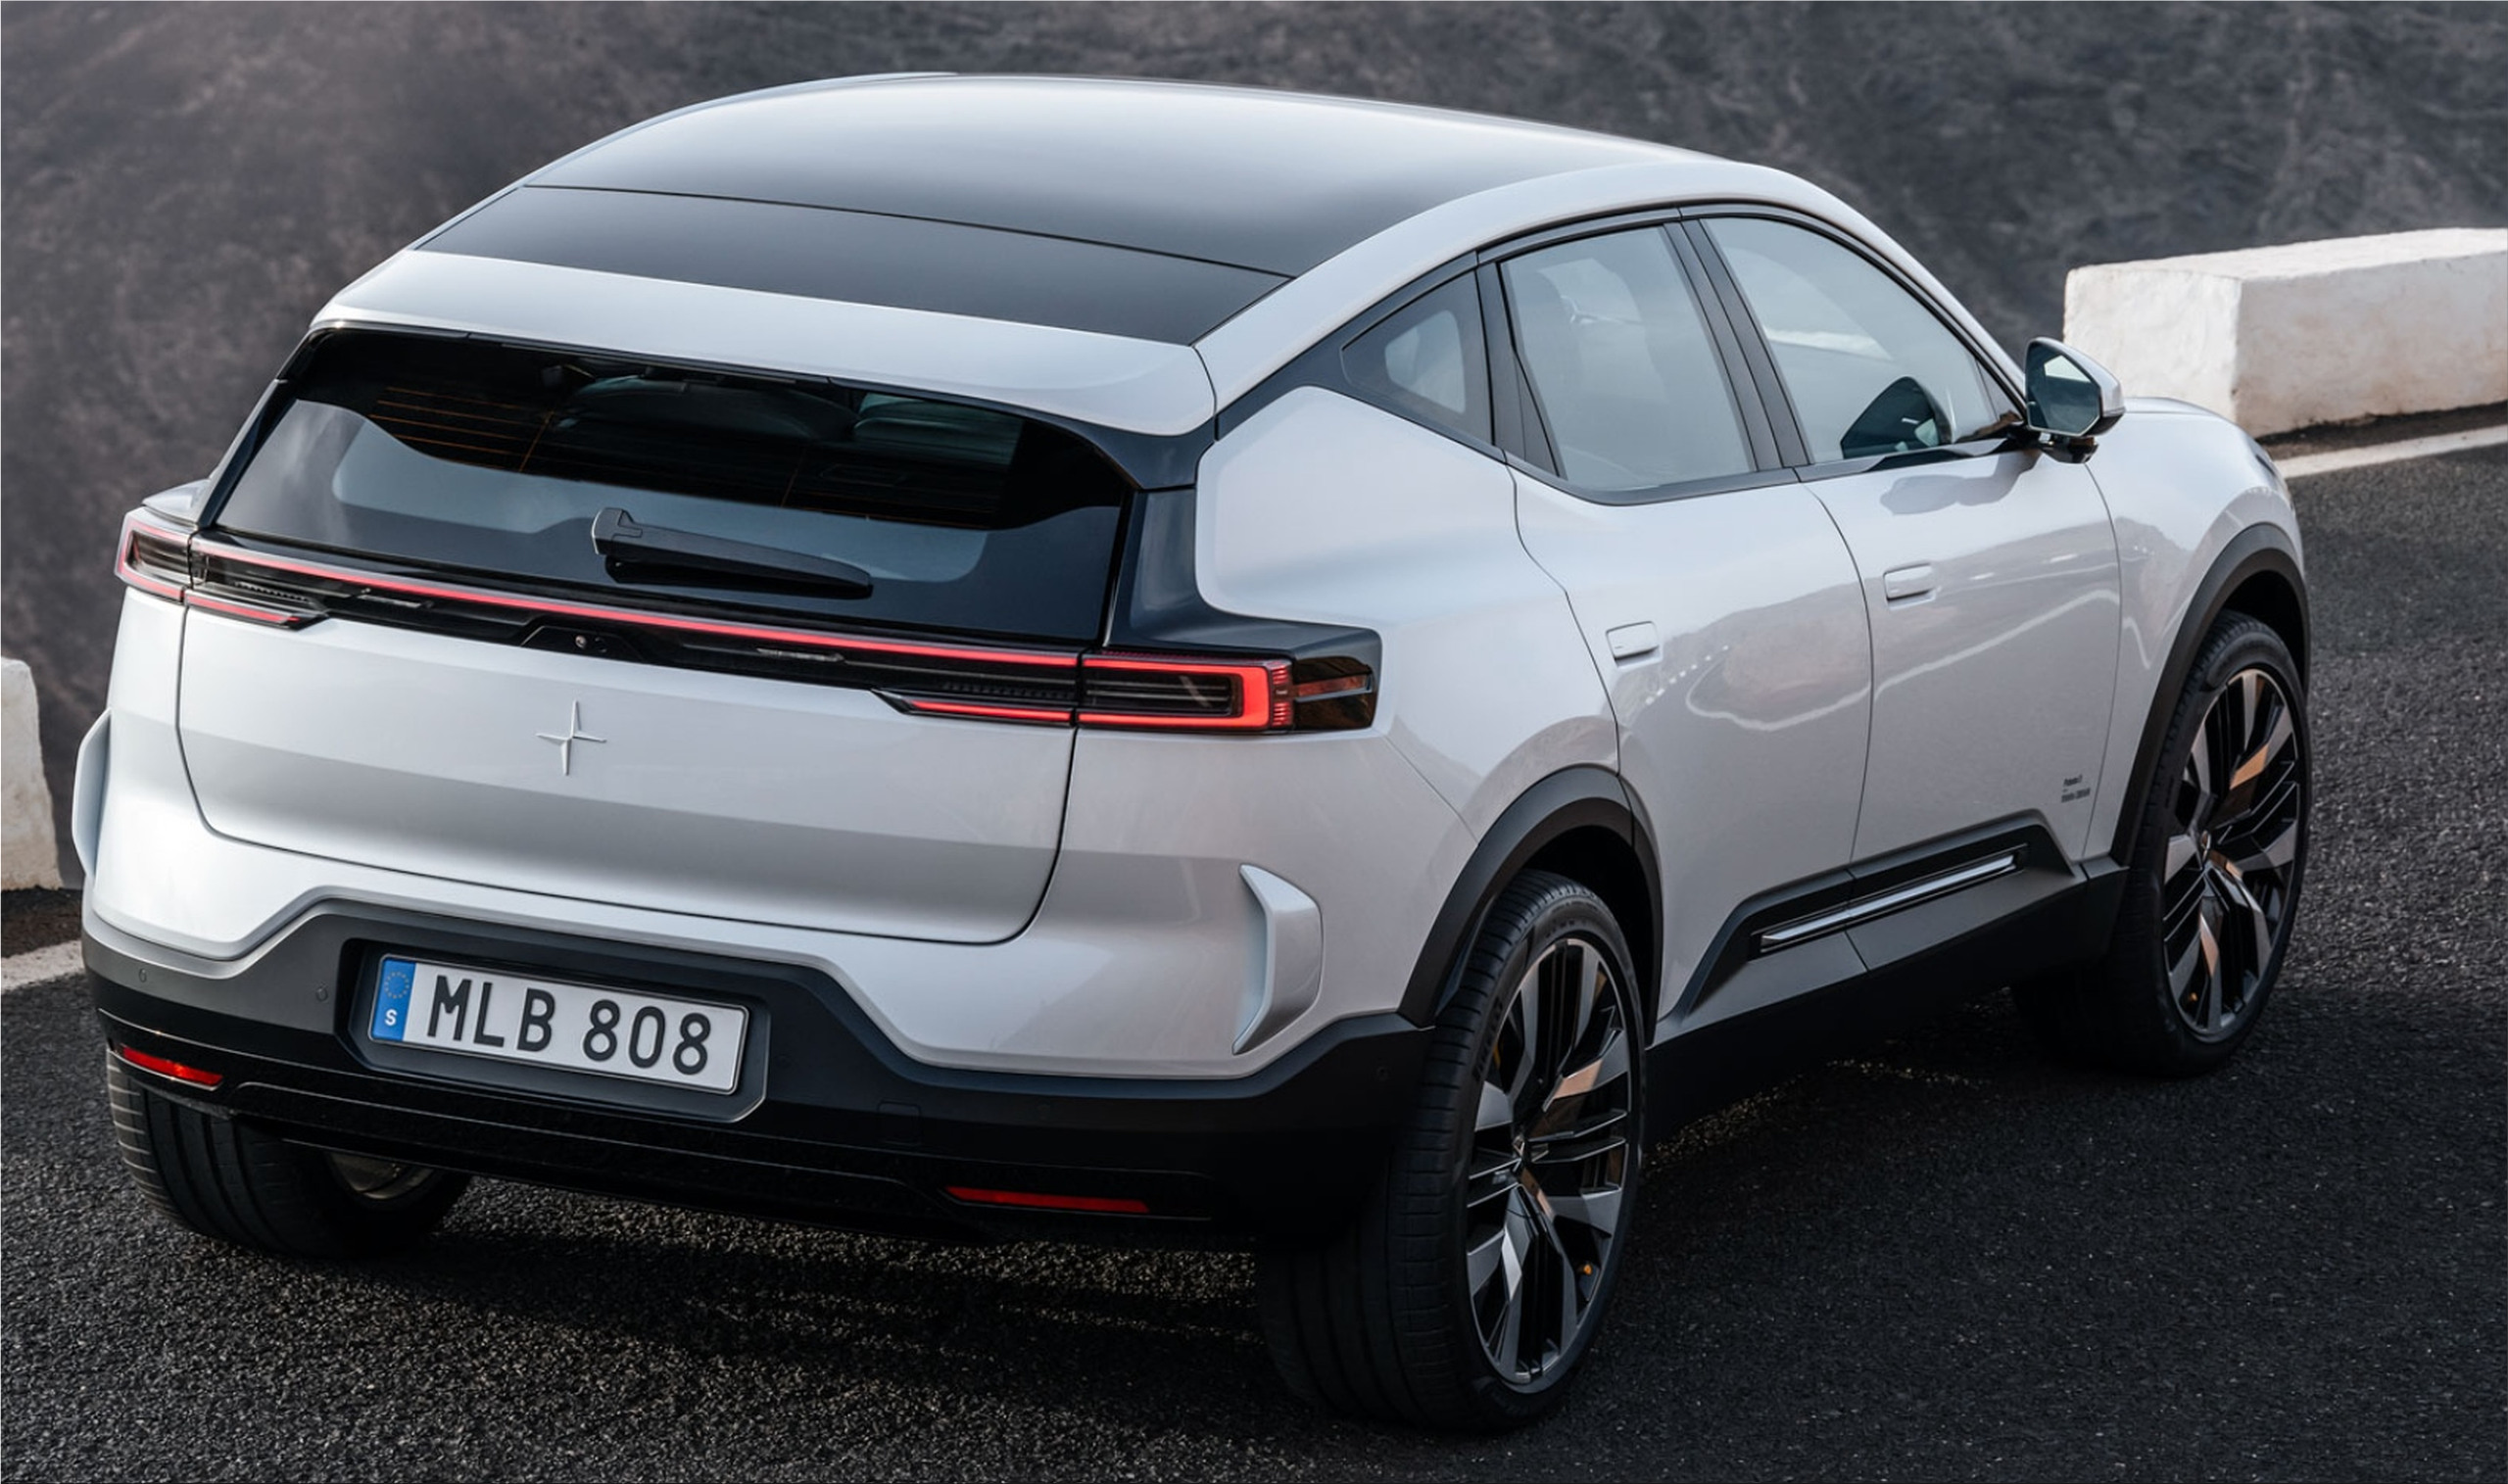 The Polestar 7 is the first Polestar electric vehicle built in Europe